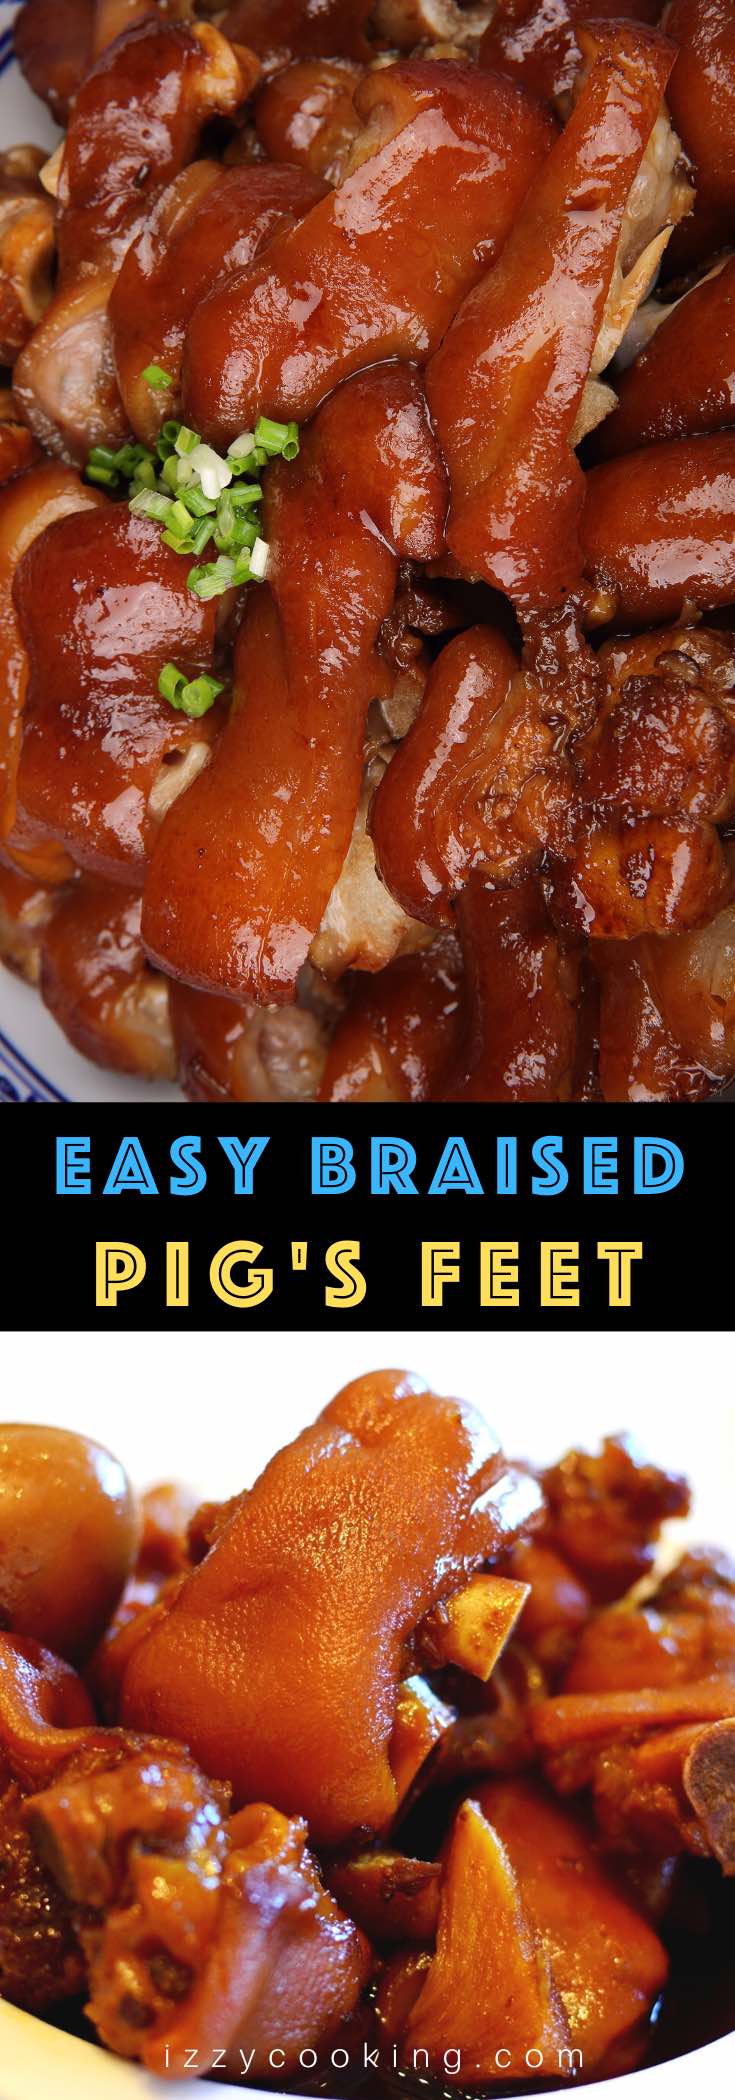 Braised Pig’s Feet are tender, juicy, and flavorful – cooked long and slow in a rich sauce. Pig feet or pig trotters are considered one of the most delicious parts of pork. My family make this recipe for regular weekdays and special occasions like Chinese New Year. Serve them with mashed potatoes and green vegetables for an amazing meal! #PigFeet #PigFeetRecipe #PigTrotters #PorkFeet